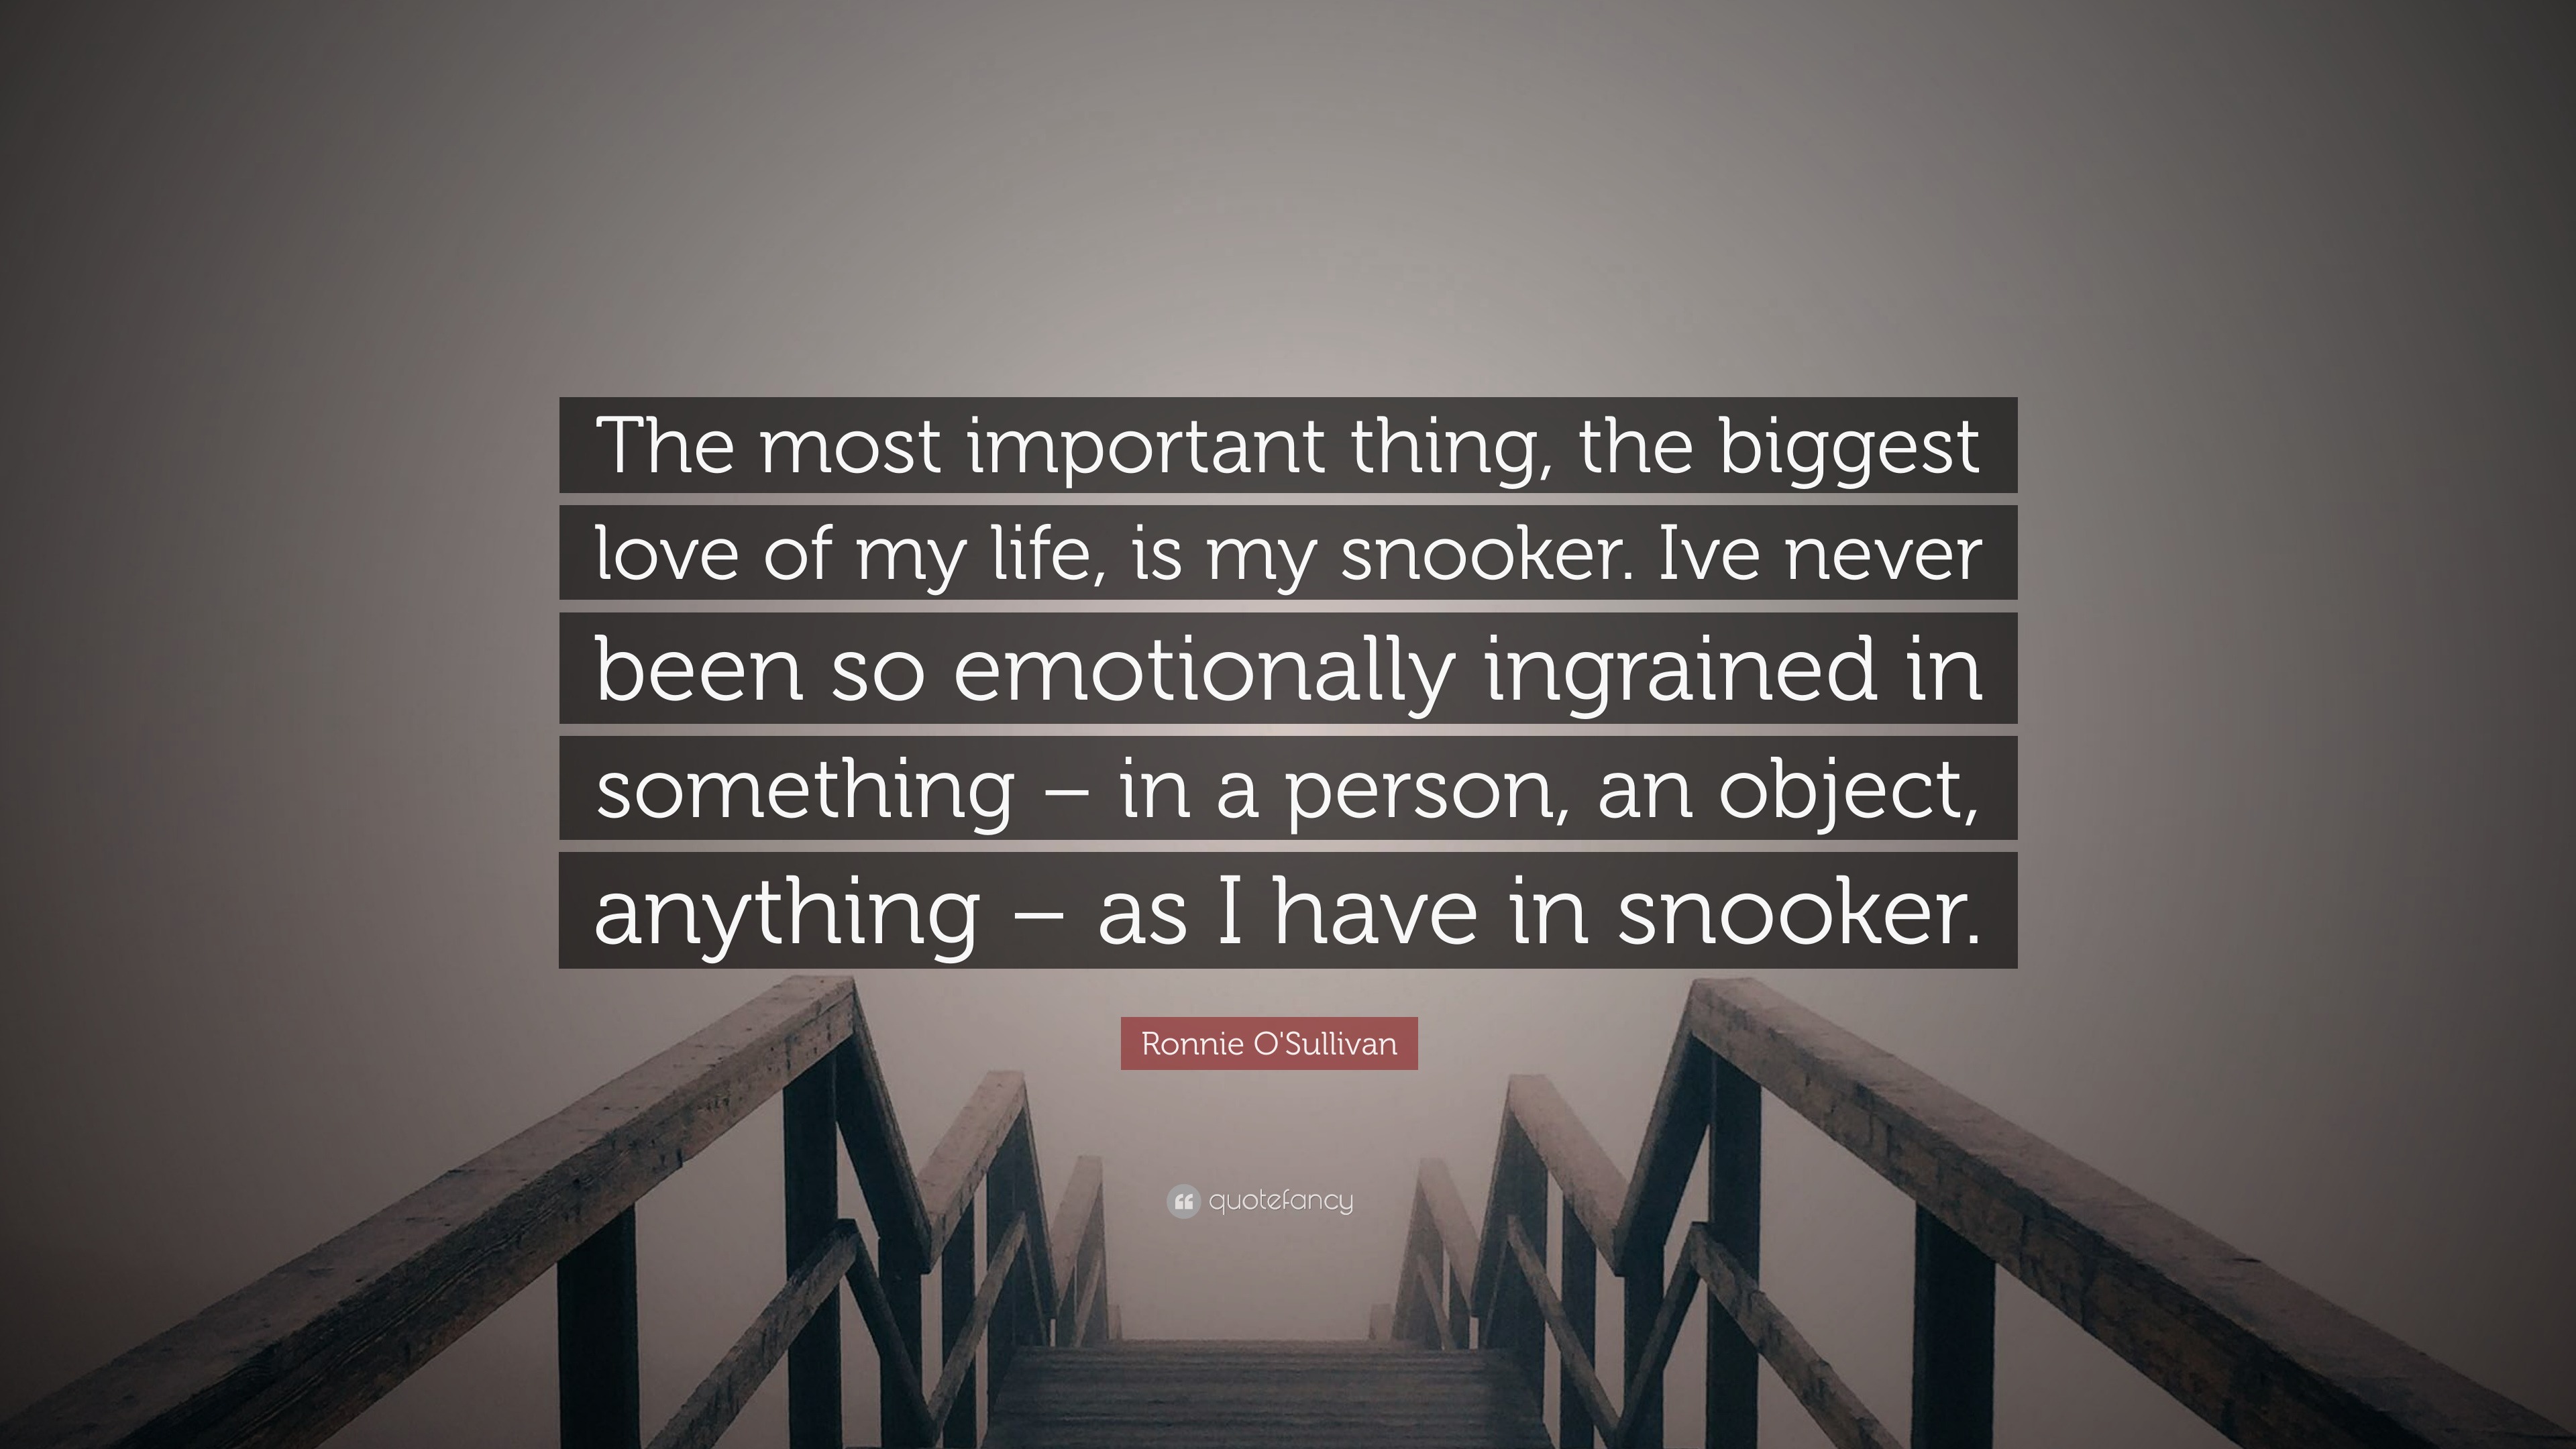 Ronnie O Sullivan Quote “The most important thing the biggest love of